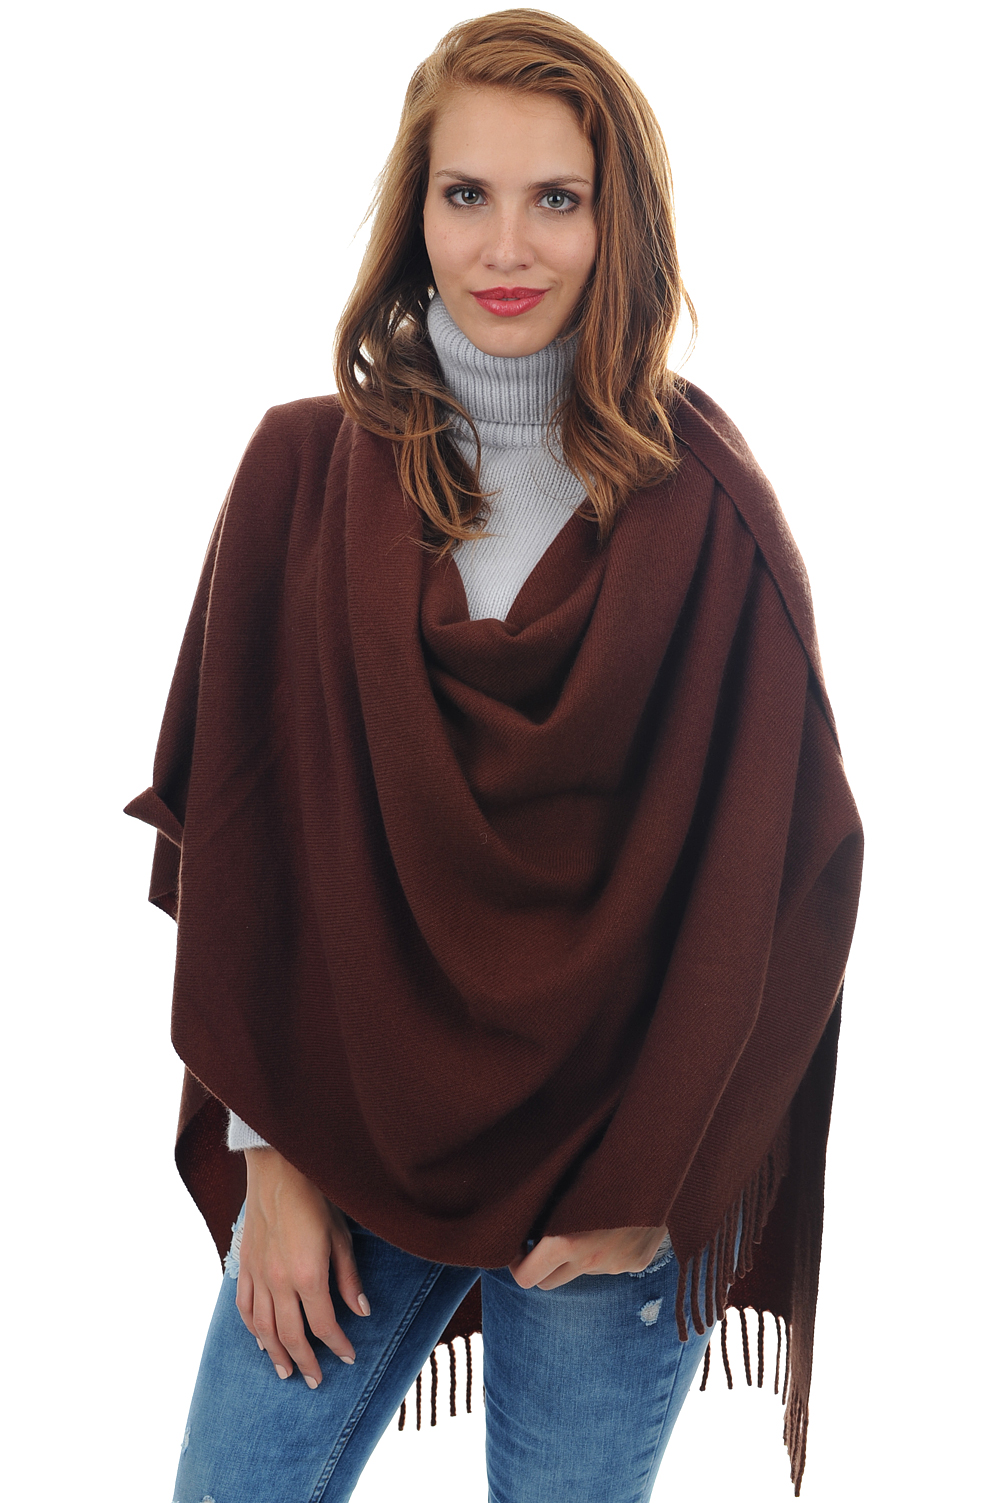 Cashmere accessories scarves mufflers niry chocolate 200x90cm